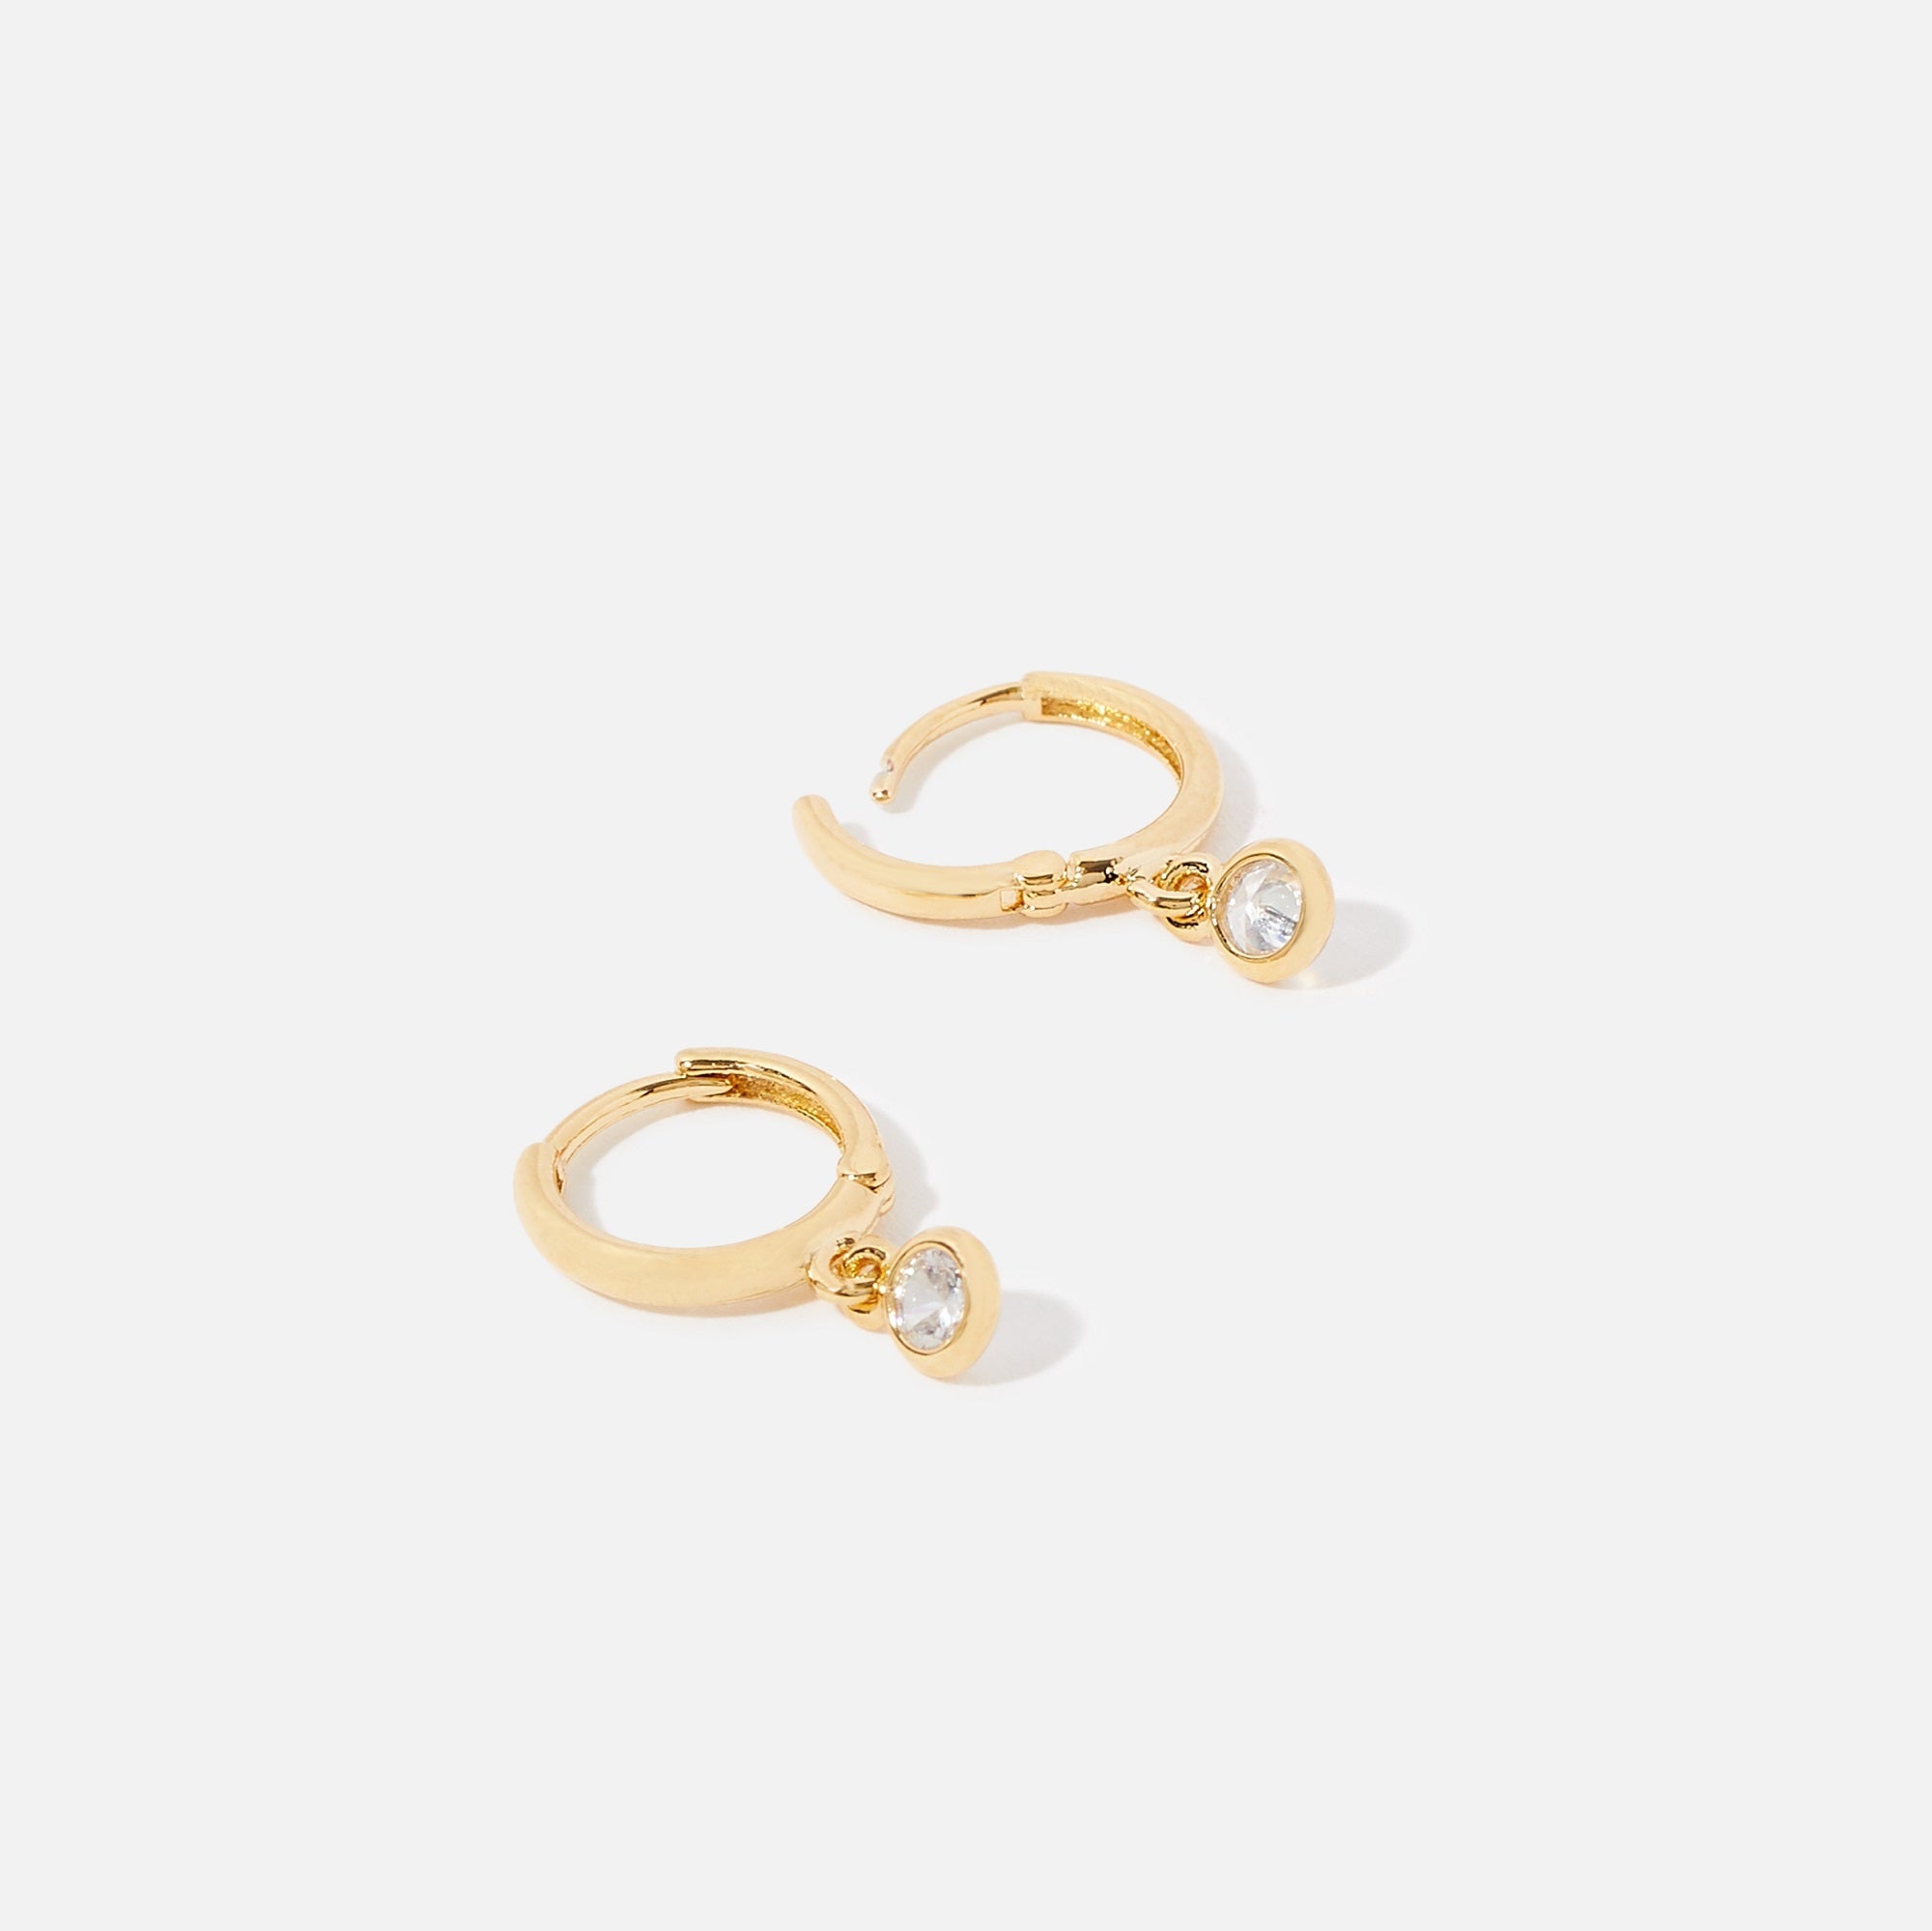 Real Gold Plated Sparkle Drop Hoops Earring For Women By Accessorize London